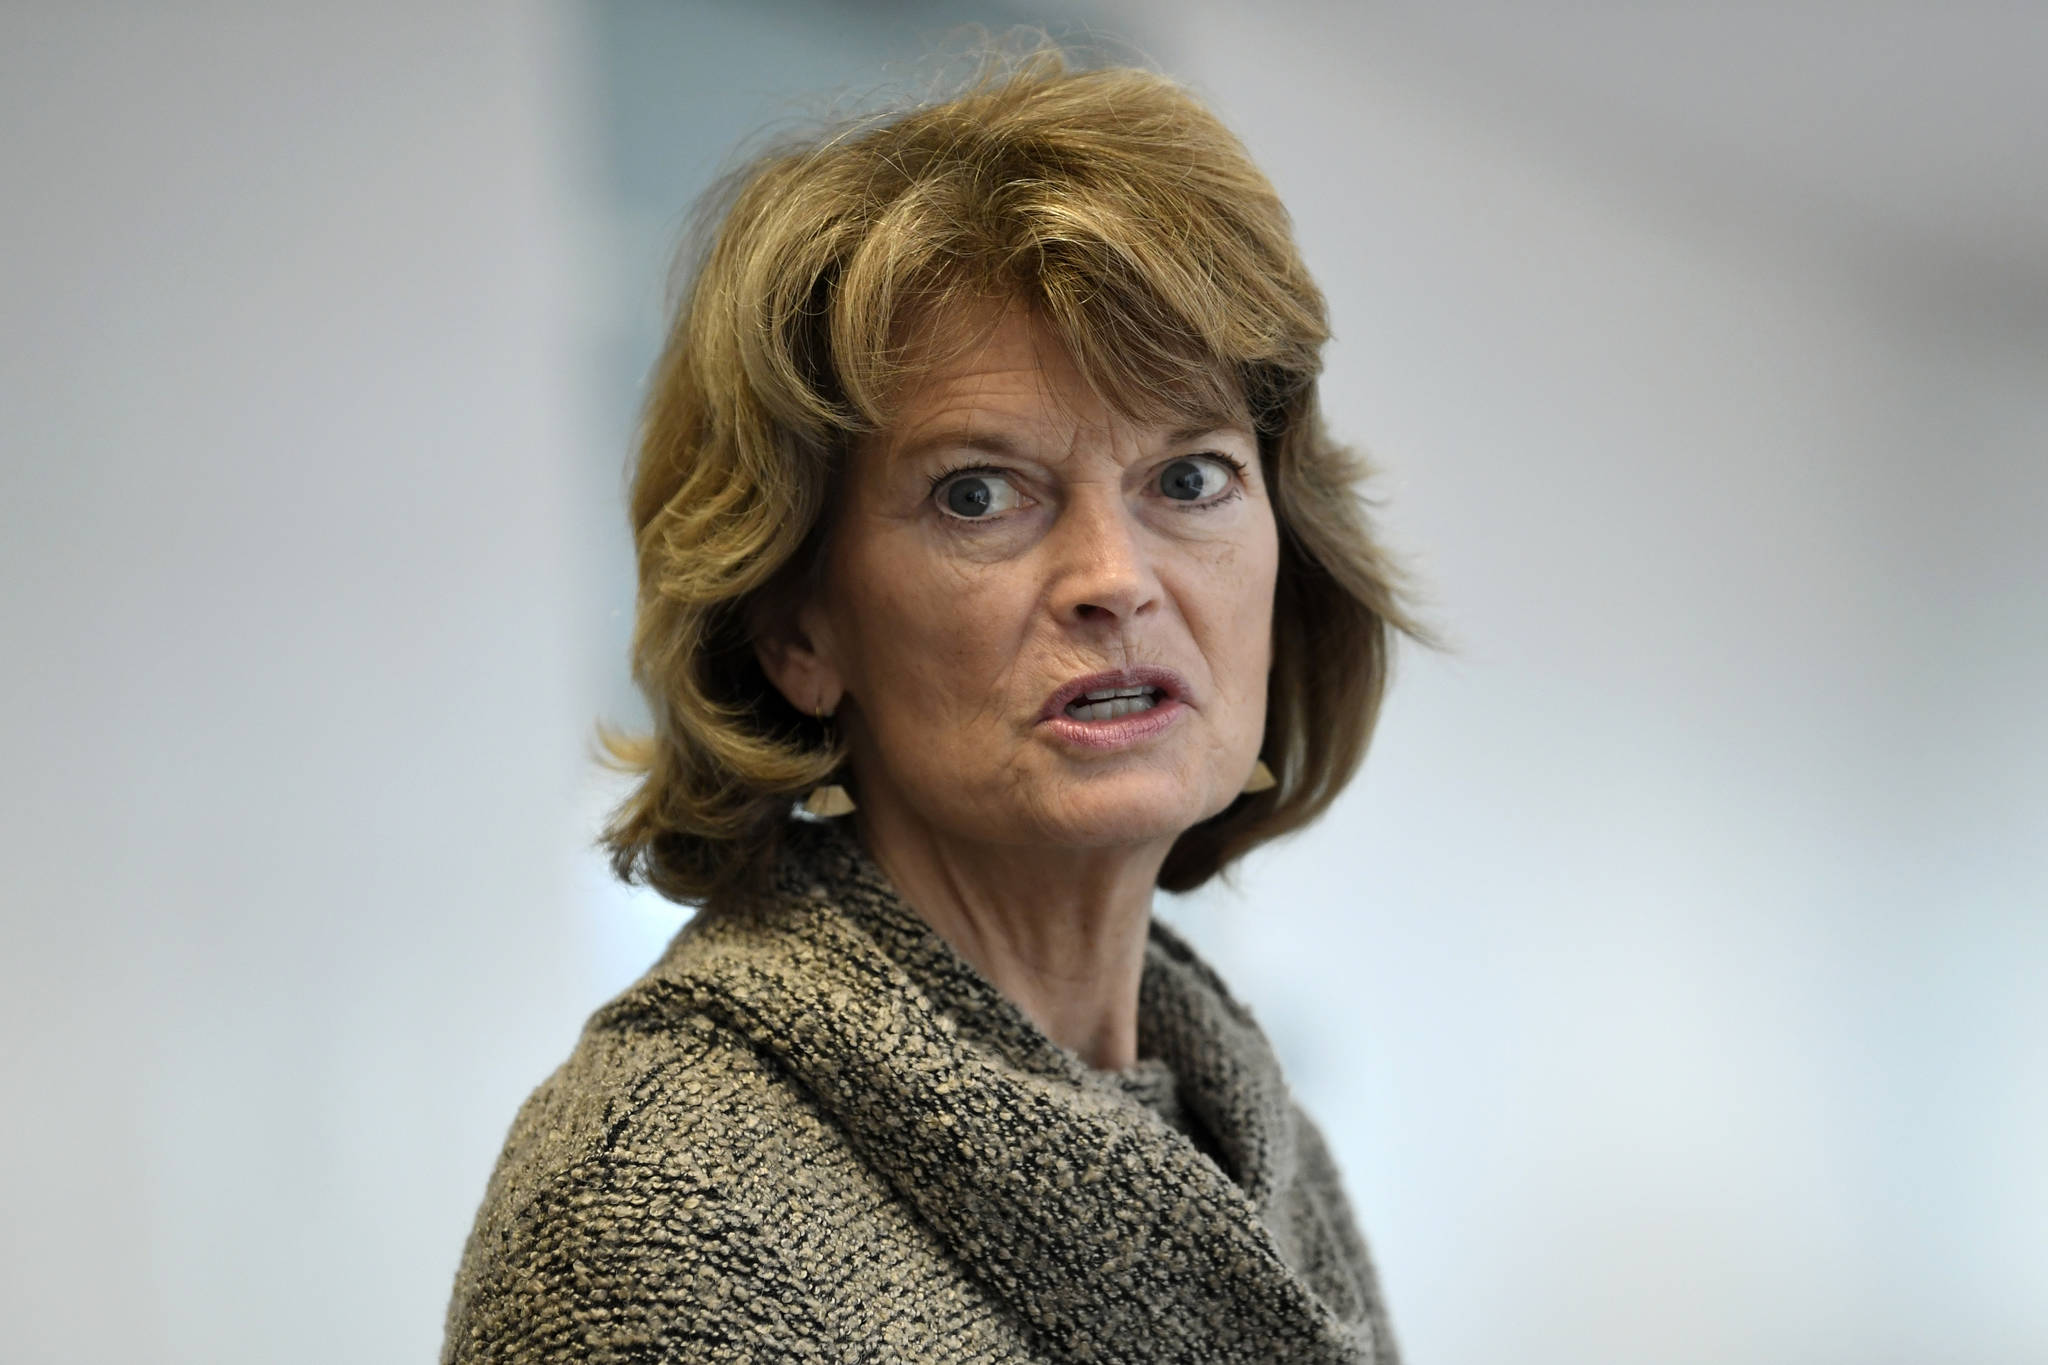 In this March 19, 2020, file photo Sen. Lisa Murkowski, R-Alaska, talks with reporters following a Republican policy lunch on Capitol Hill in Washington. Murkowski acknowledged Thursday, June 4, that she’s “struggling” over whether she can support President Donald Trump given his handling of the virus and race crises shaking the United States. (AP Photo/Susan Walsh, File)